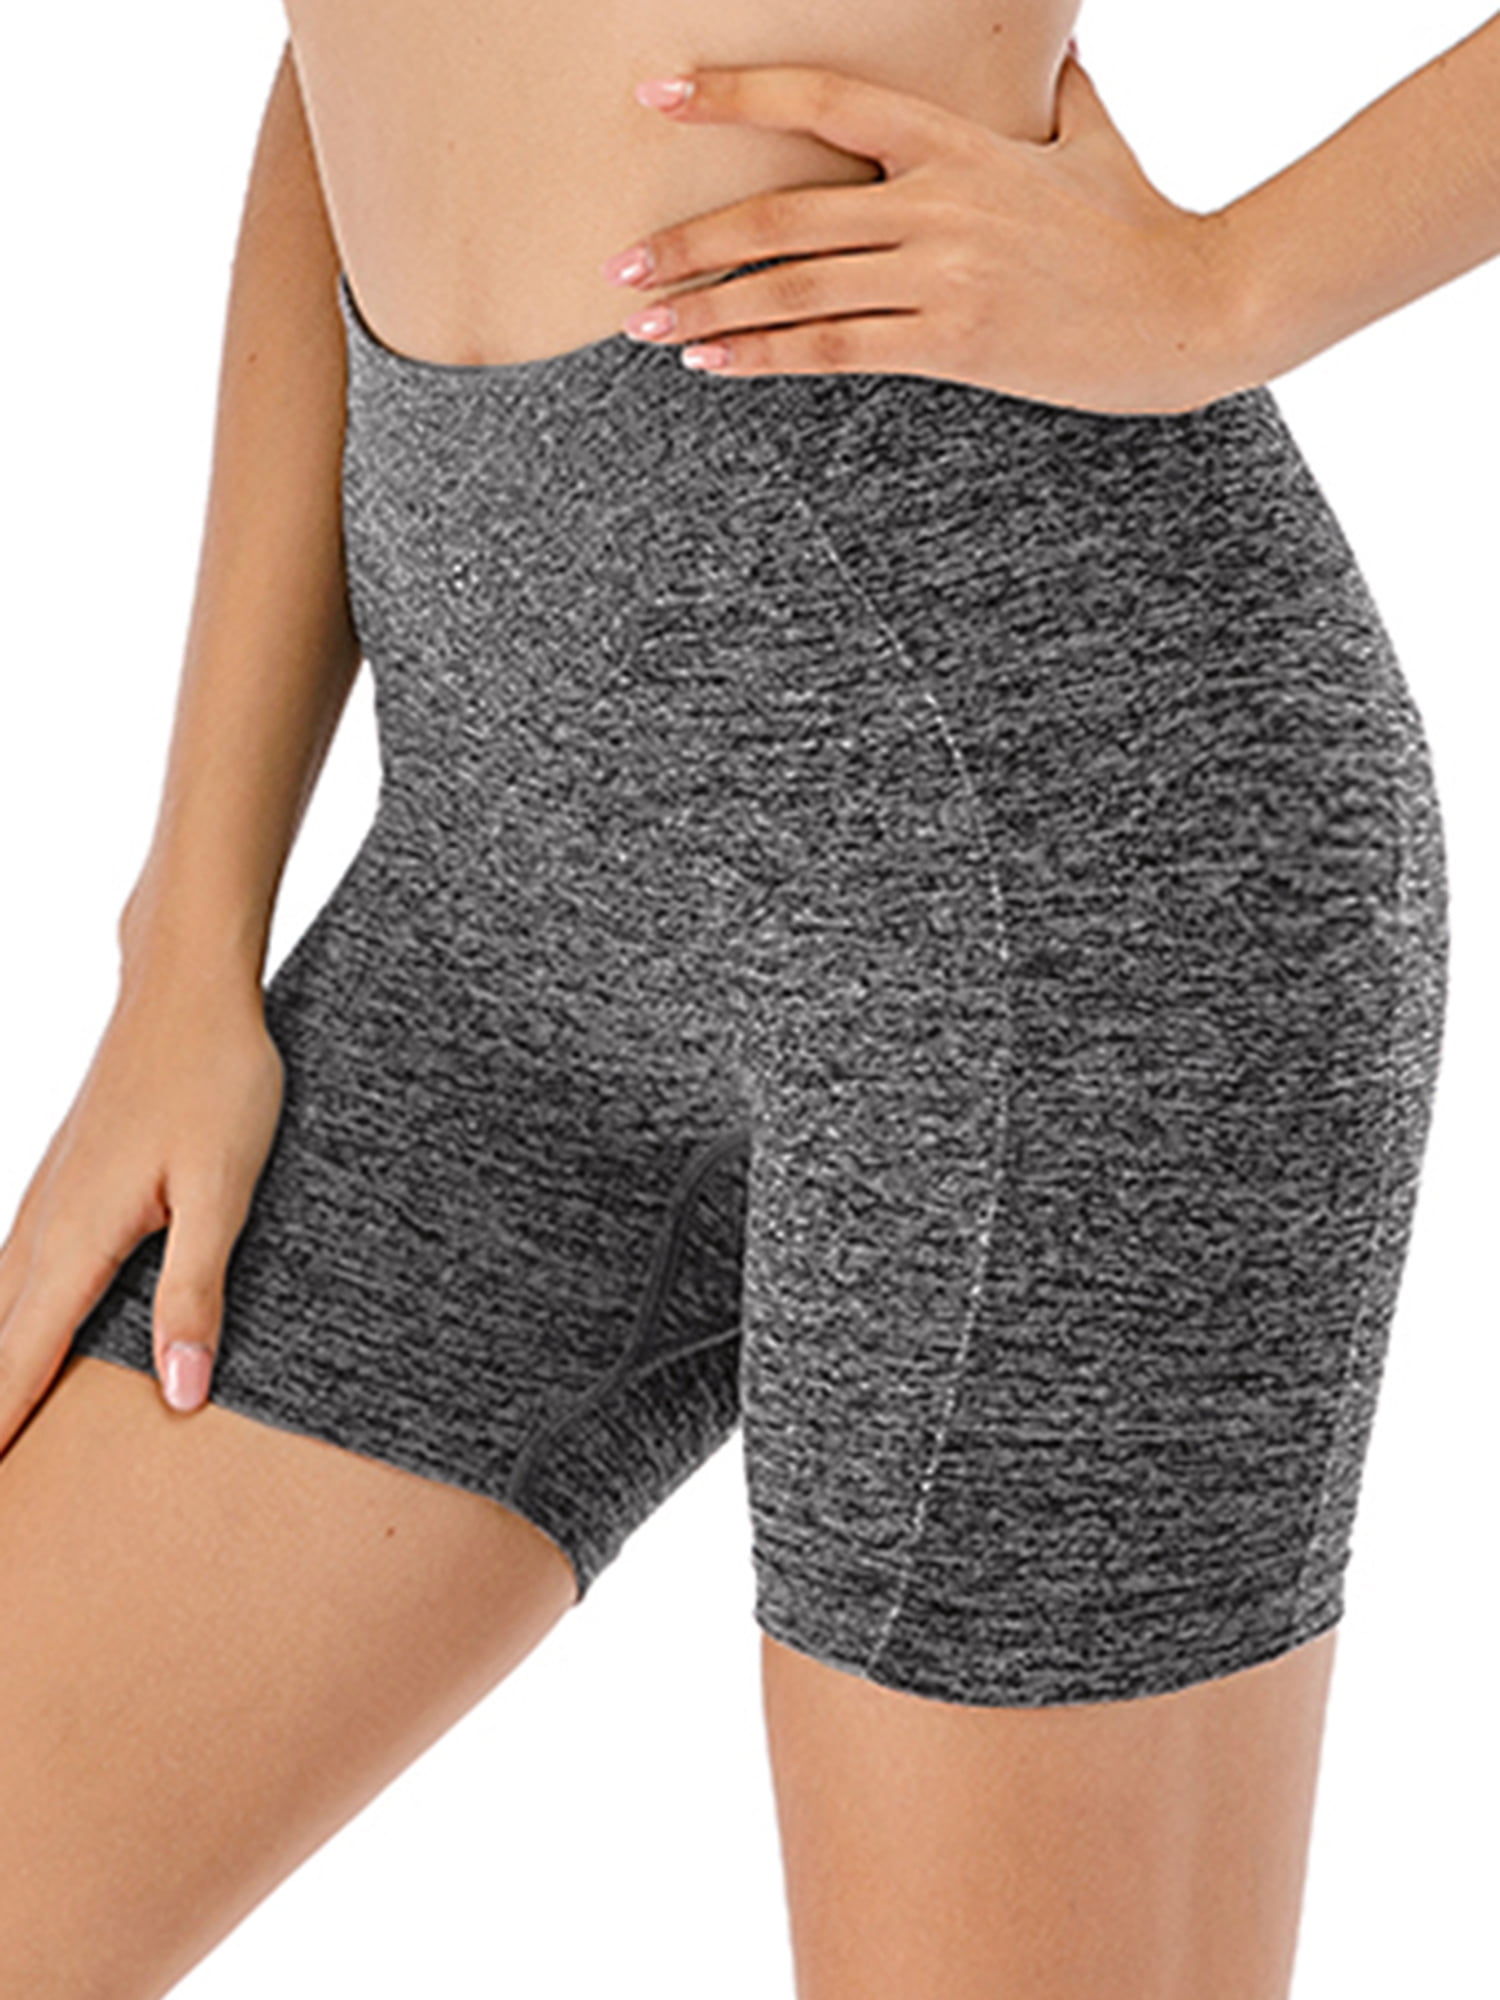 ROUJI Women High Waist Yoga Shorts with Two Side Pockets 5 8 Stretch Leggings Athletic Workout Gym Biker Shorts Booty Pants 